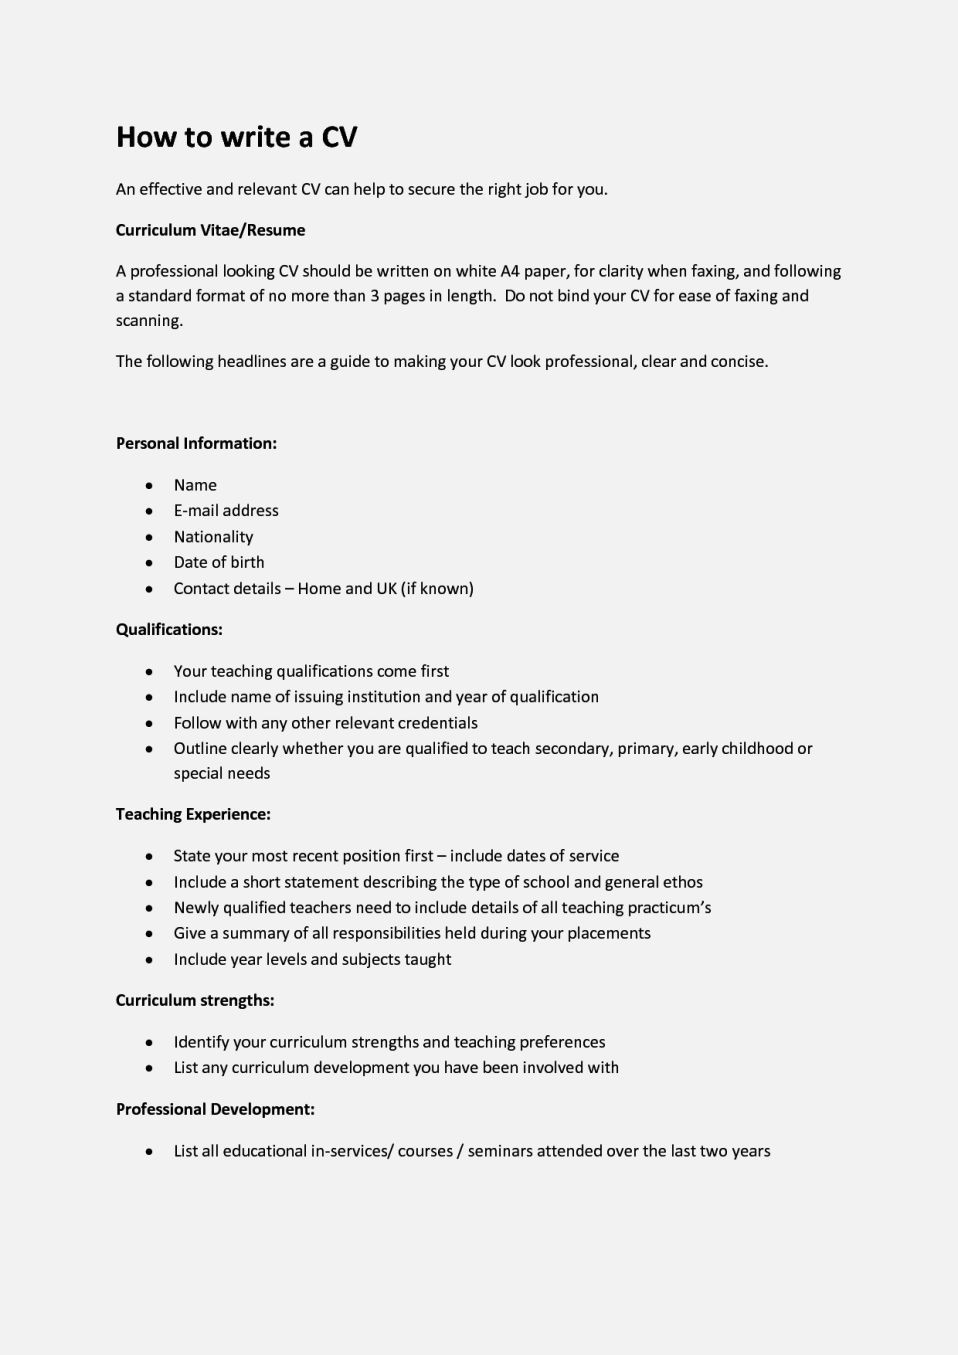 Sample Resume for 16 Year Old How to Write A Cv for A 16 Year Old with No Experience Uk Resume …